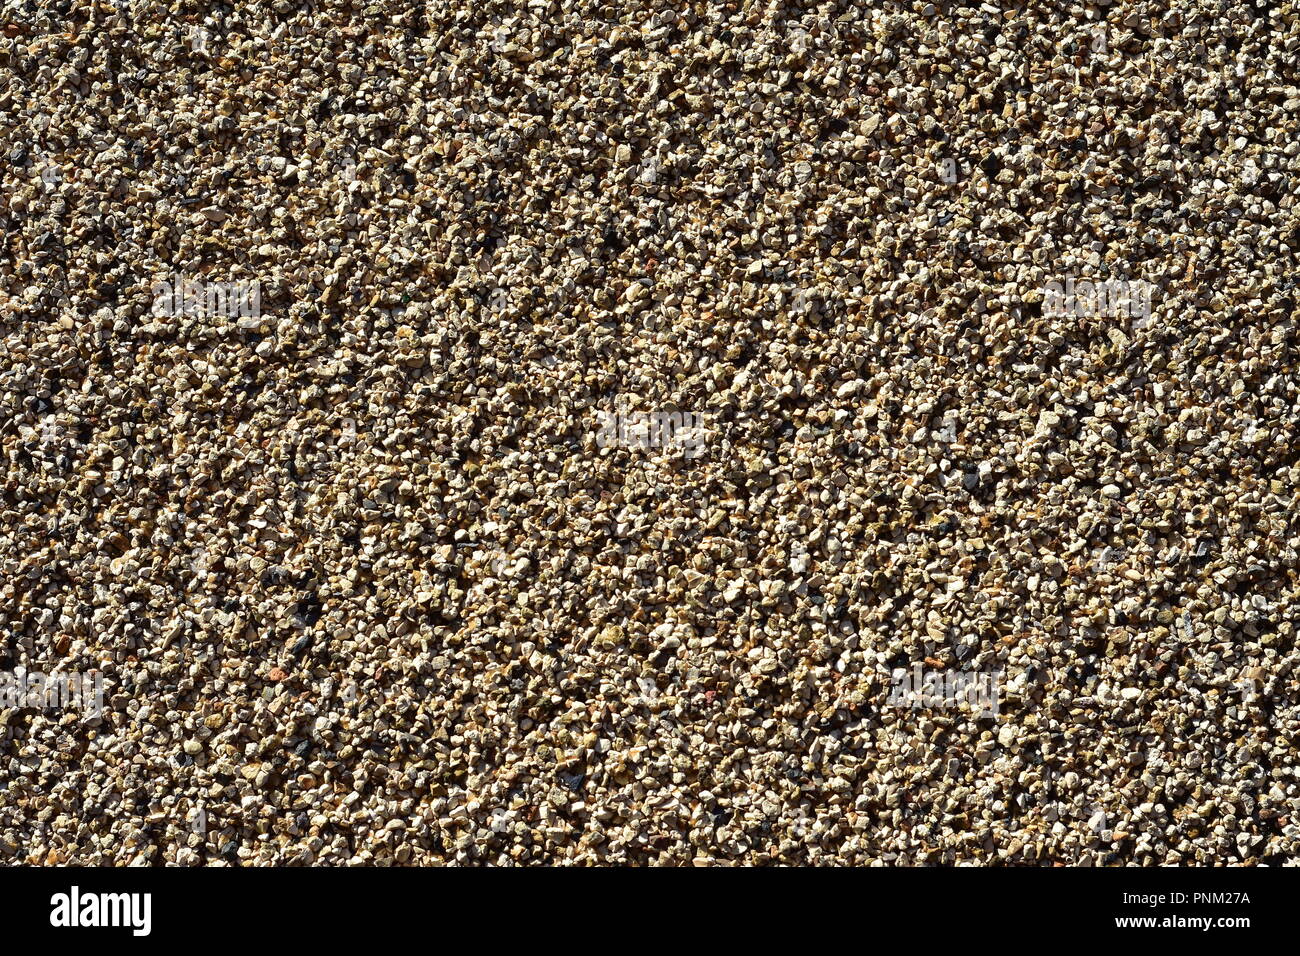 Pattern of fine gravel particles bonded together by resin. Stock Photo